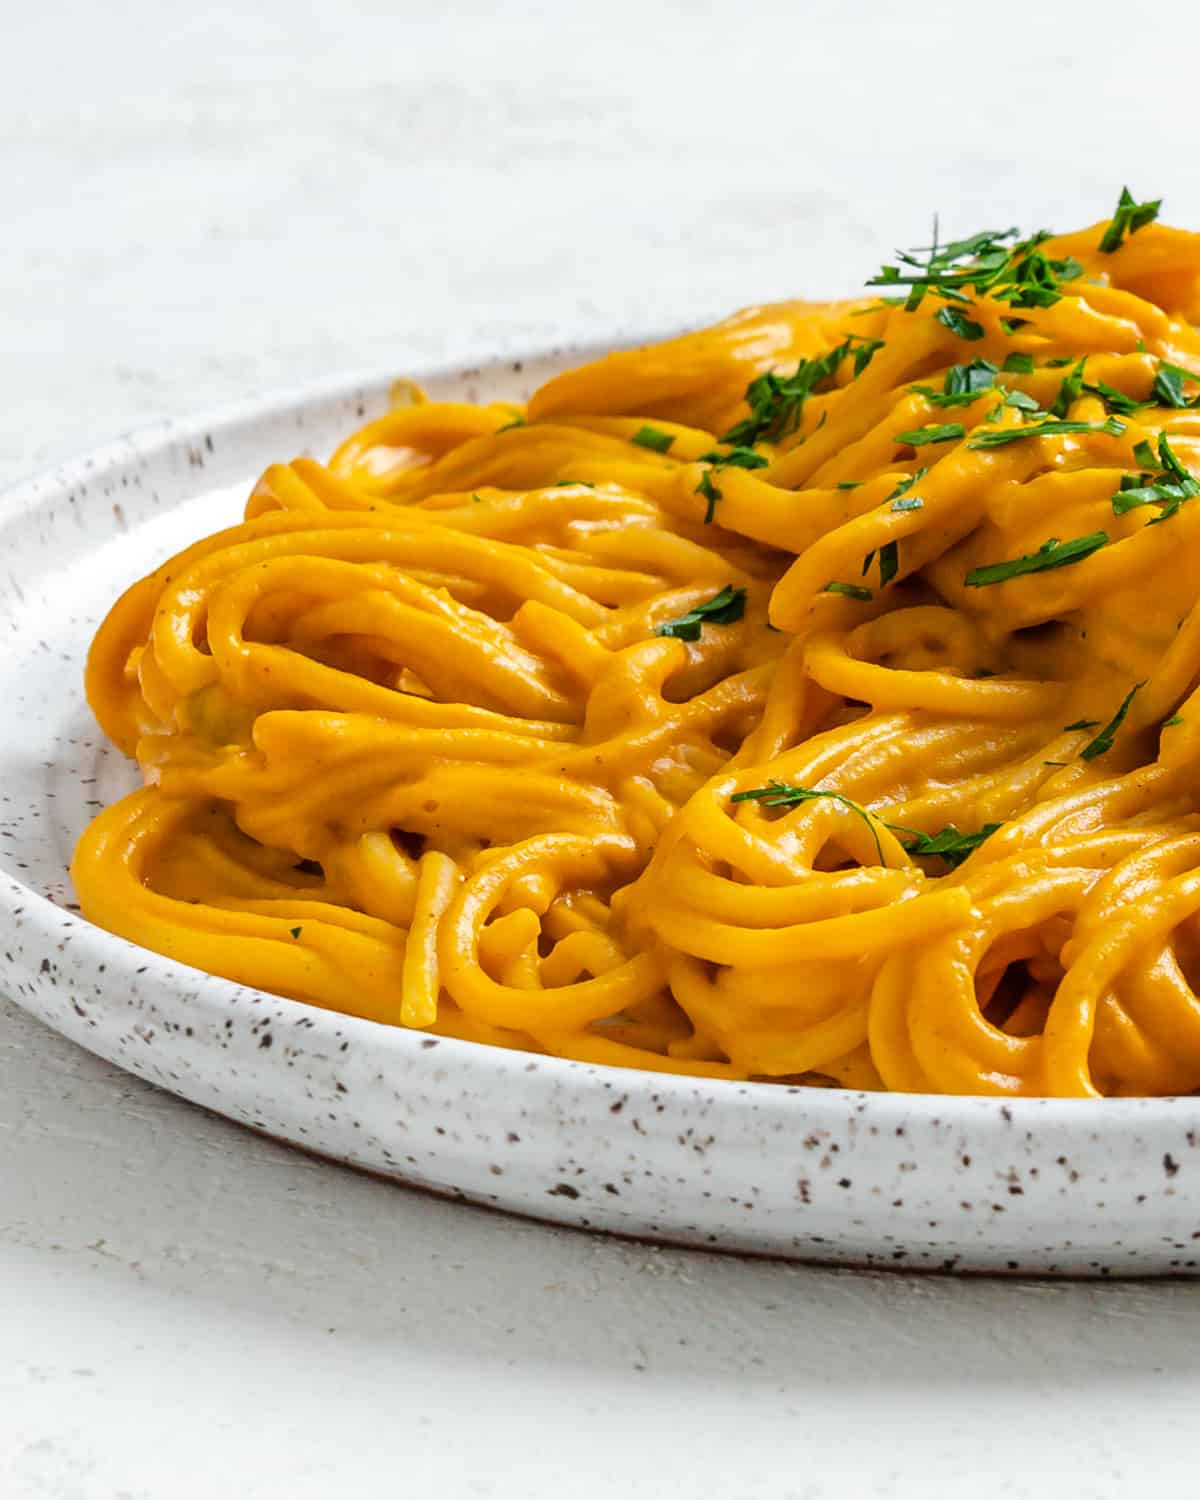 completed Sweet Potato Pasta Sauce with Spaghetti plated against a white surface